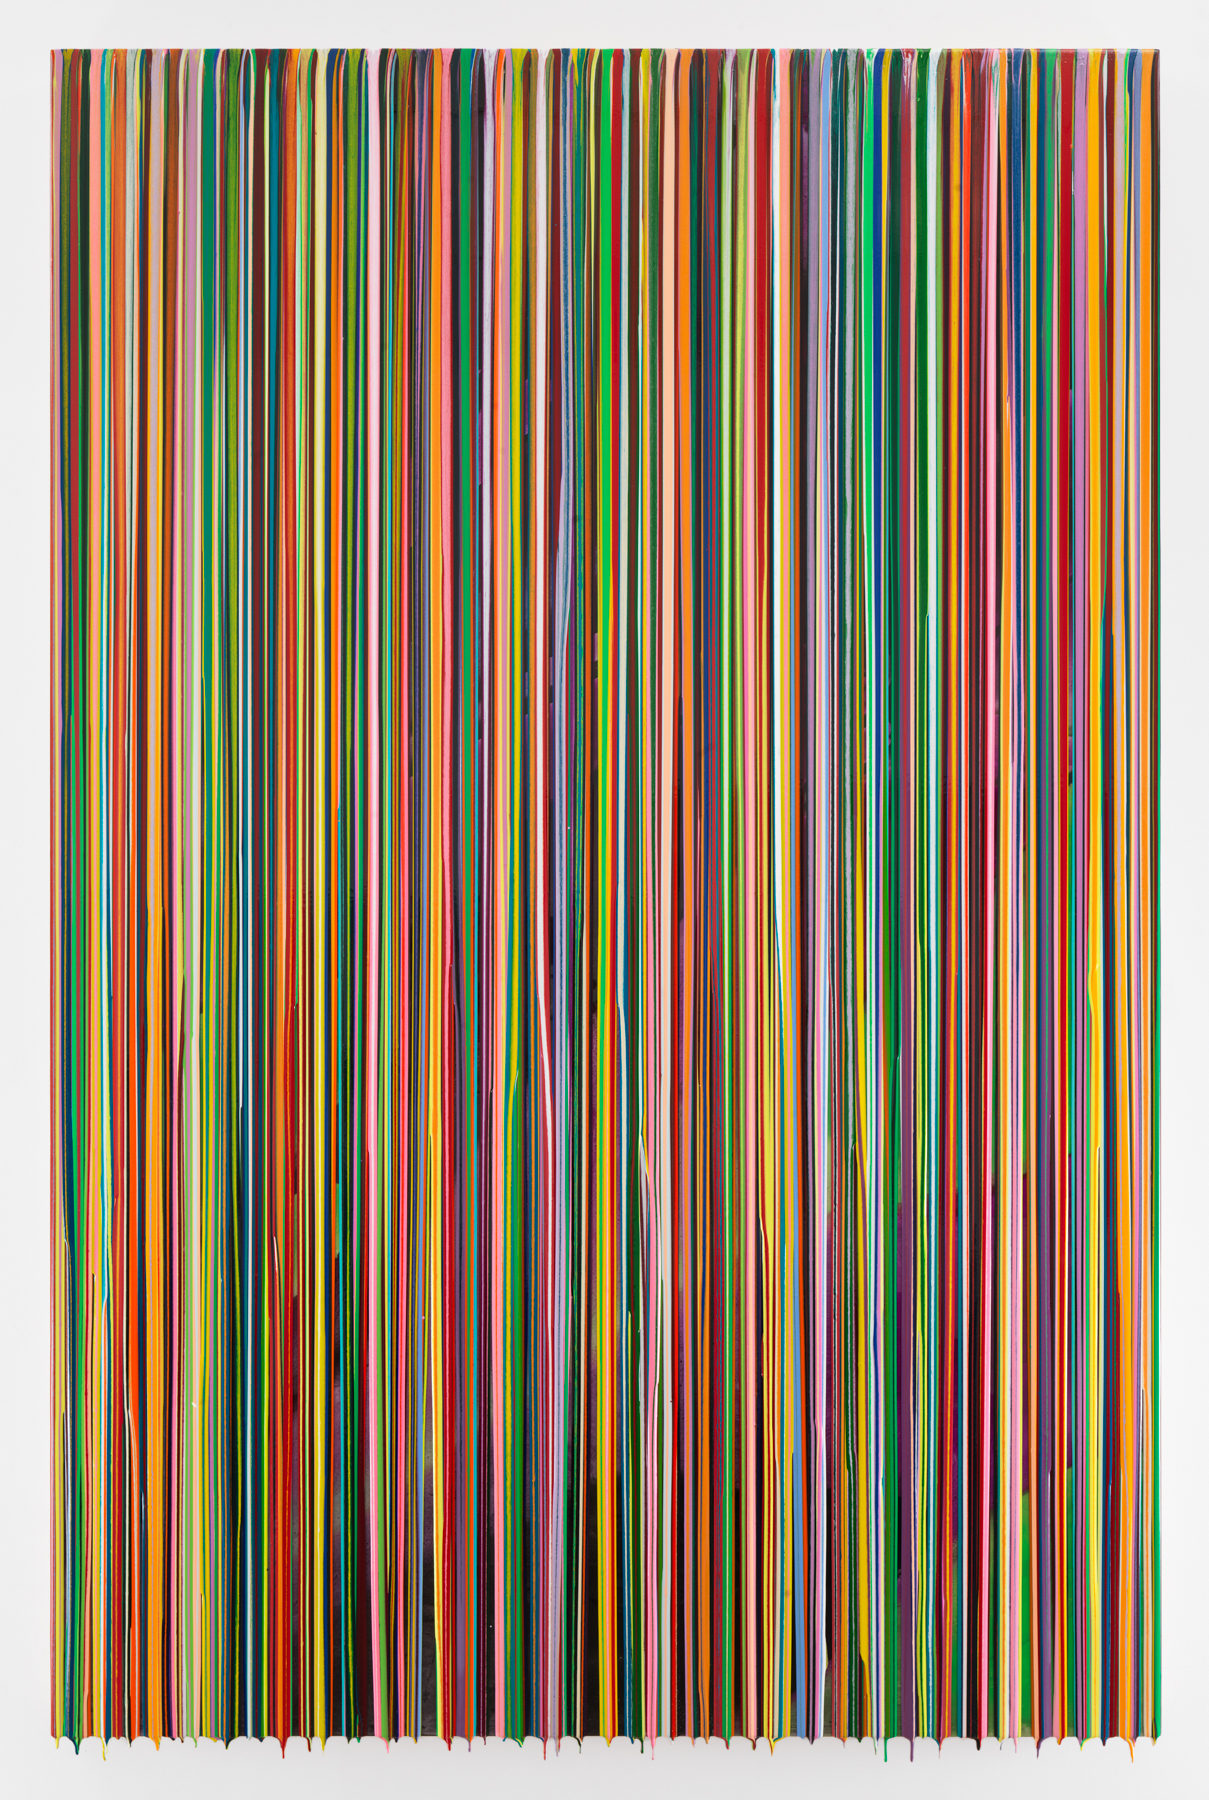 IREMEMBERMISSINGPHOTOS, 2016, Epoxy resin and pigments on wood, 90 x 60 inches, 228.6 x 152.4 cm, AMY#28373